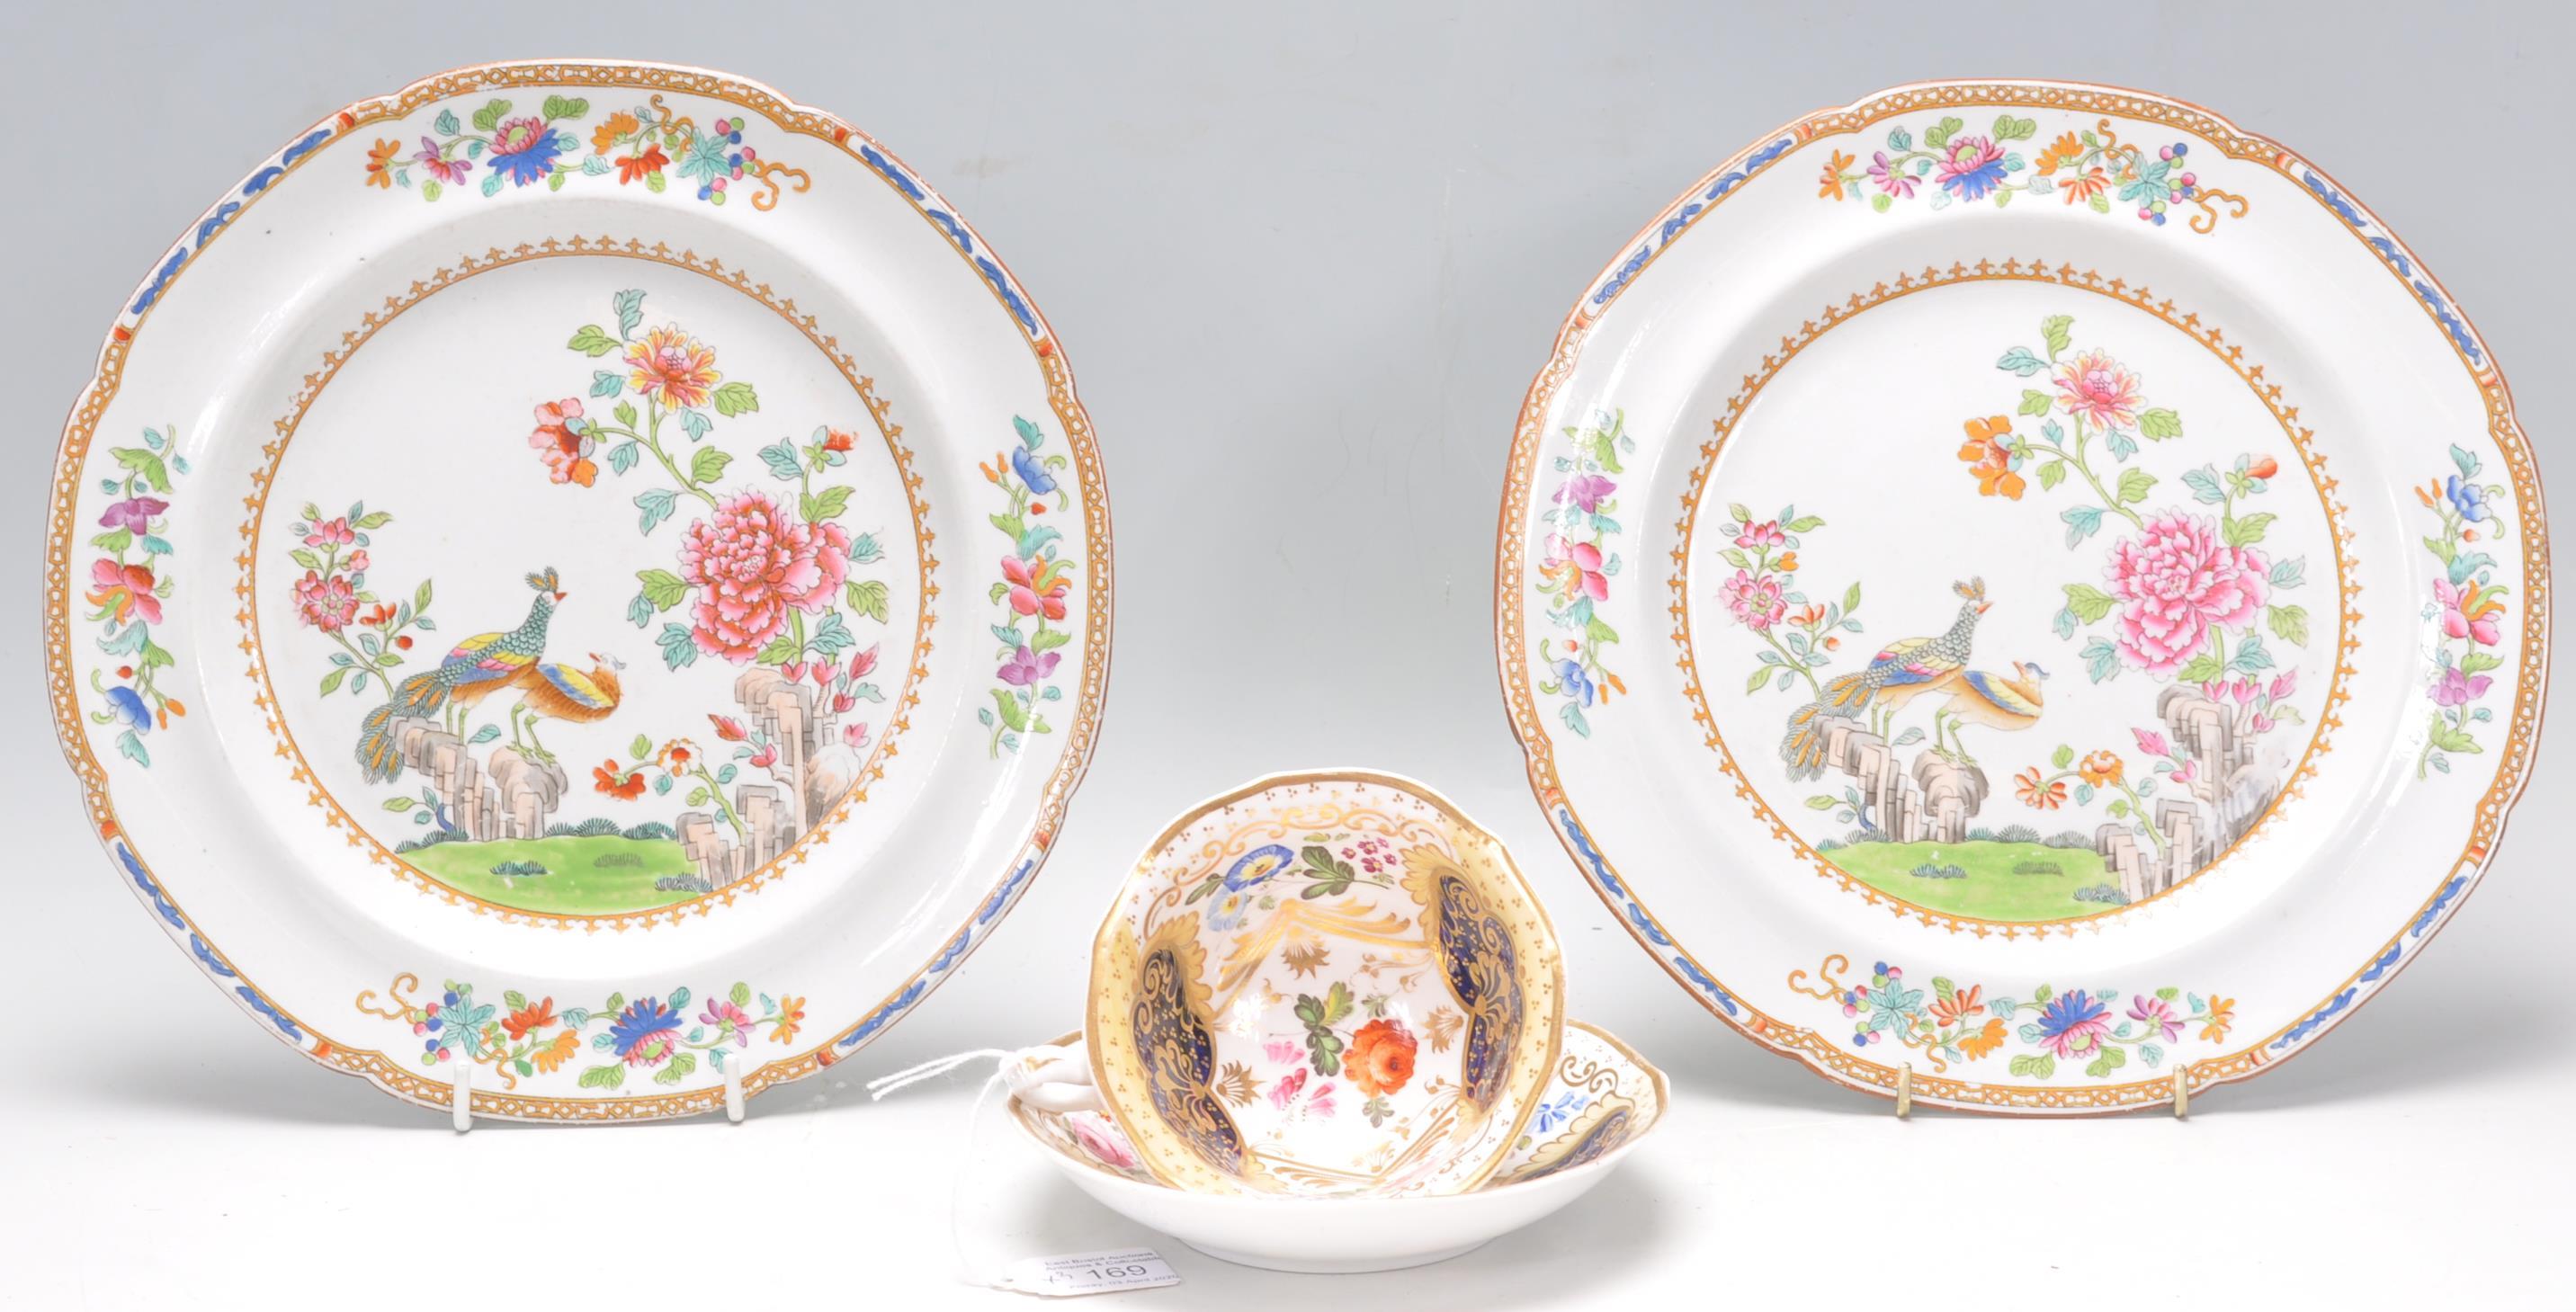 A stunning 19th Century cabinet cup and saucer in the manner of Coalport, with decorative hand